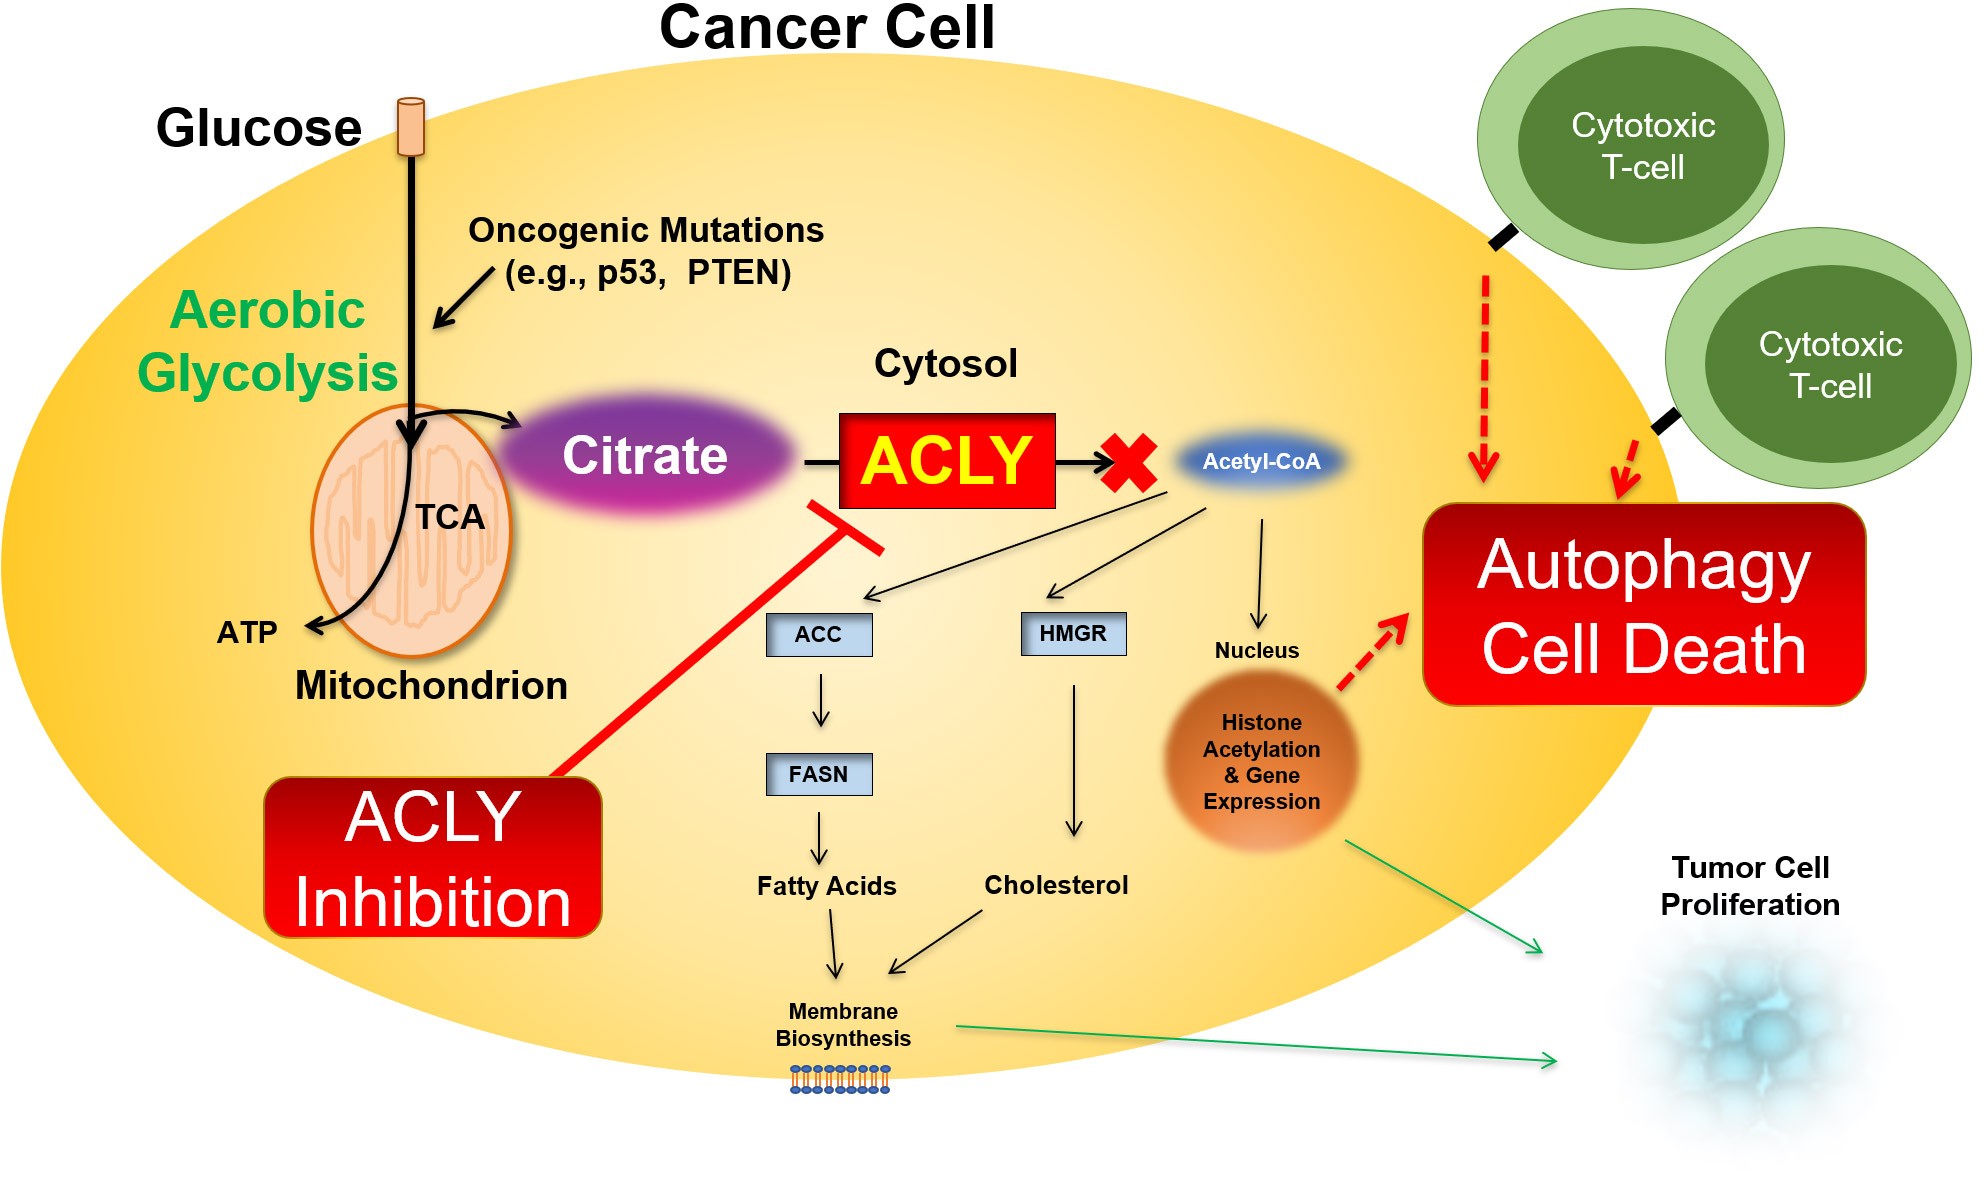 The Effects of ACLY Inhibition on Cancer Metabolism